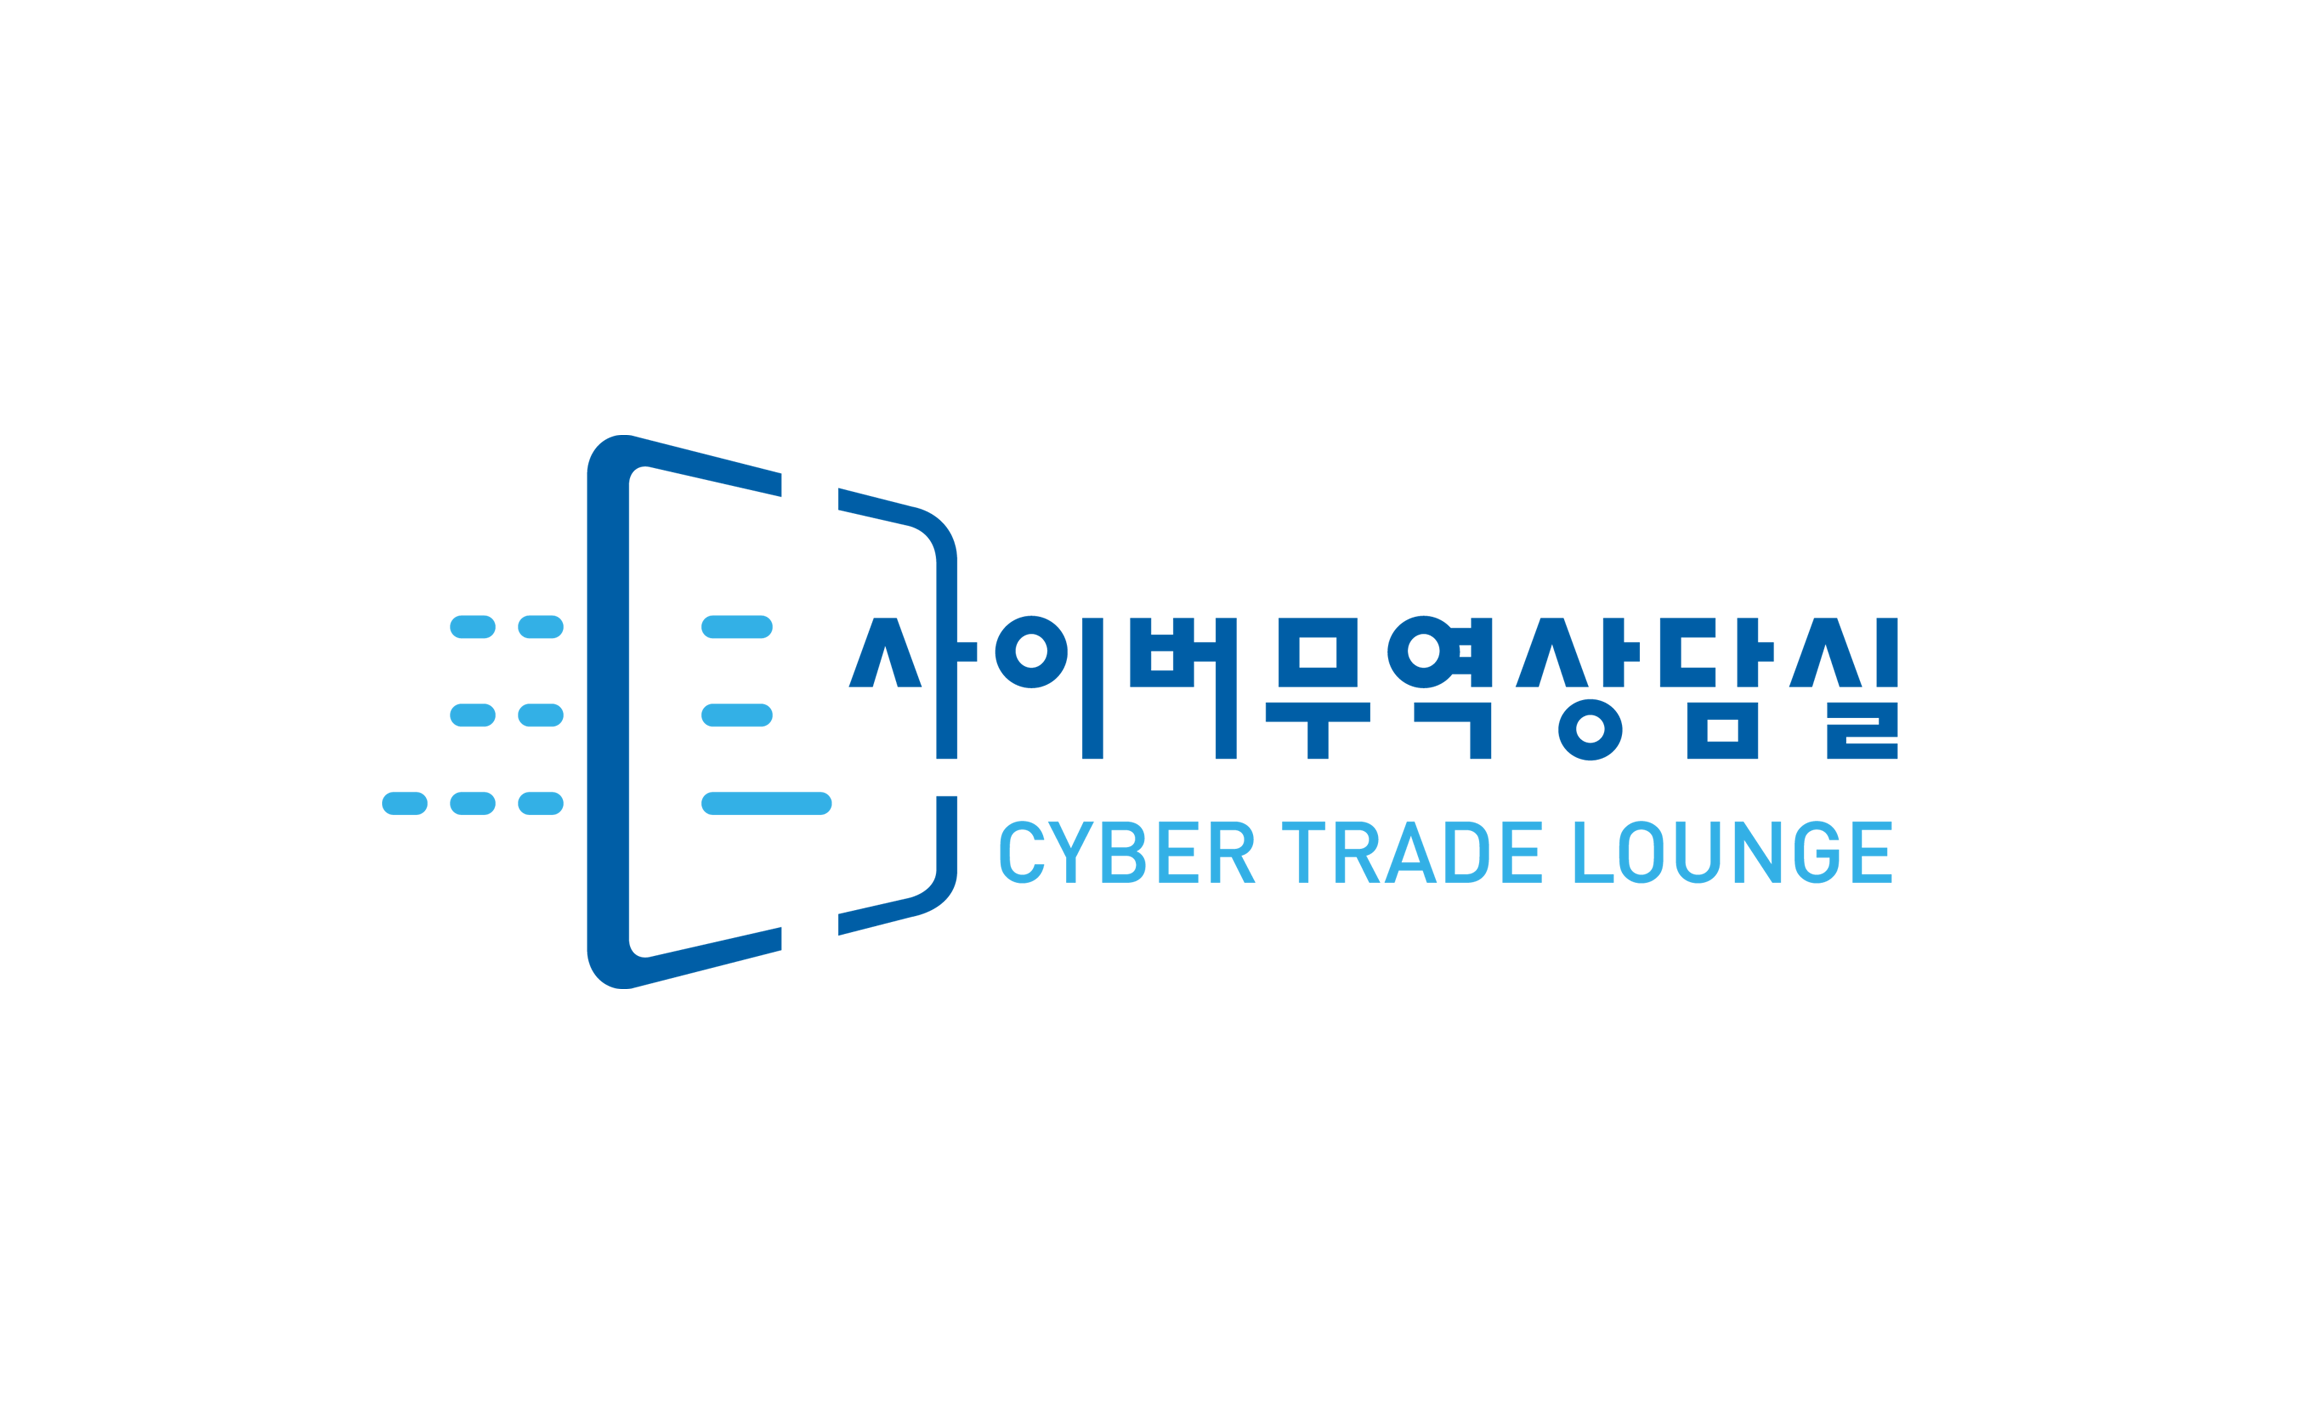 Cyber Trade Lounge sign & wall graphic